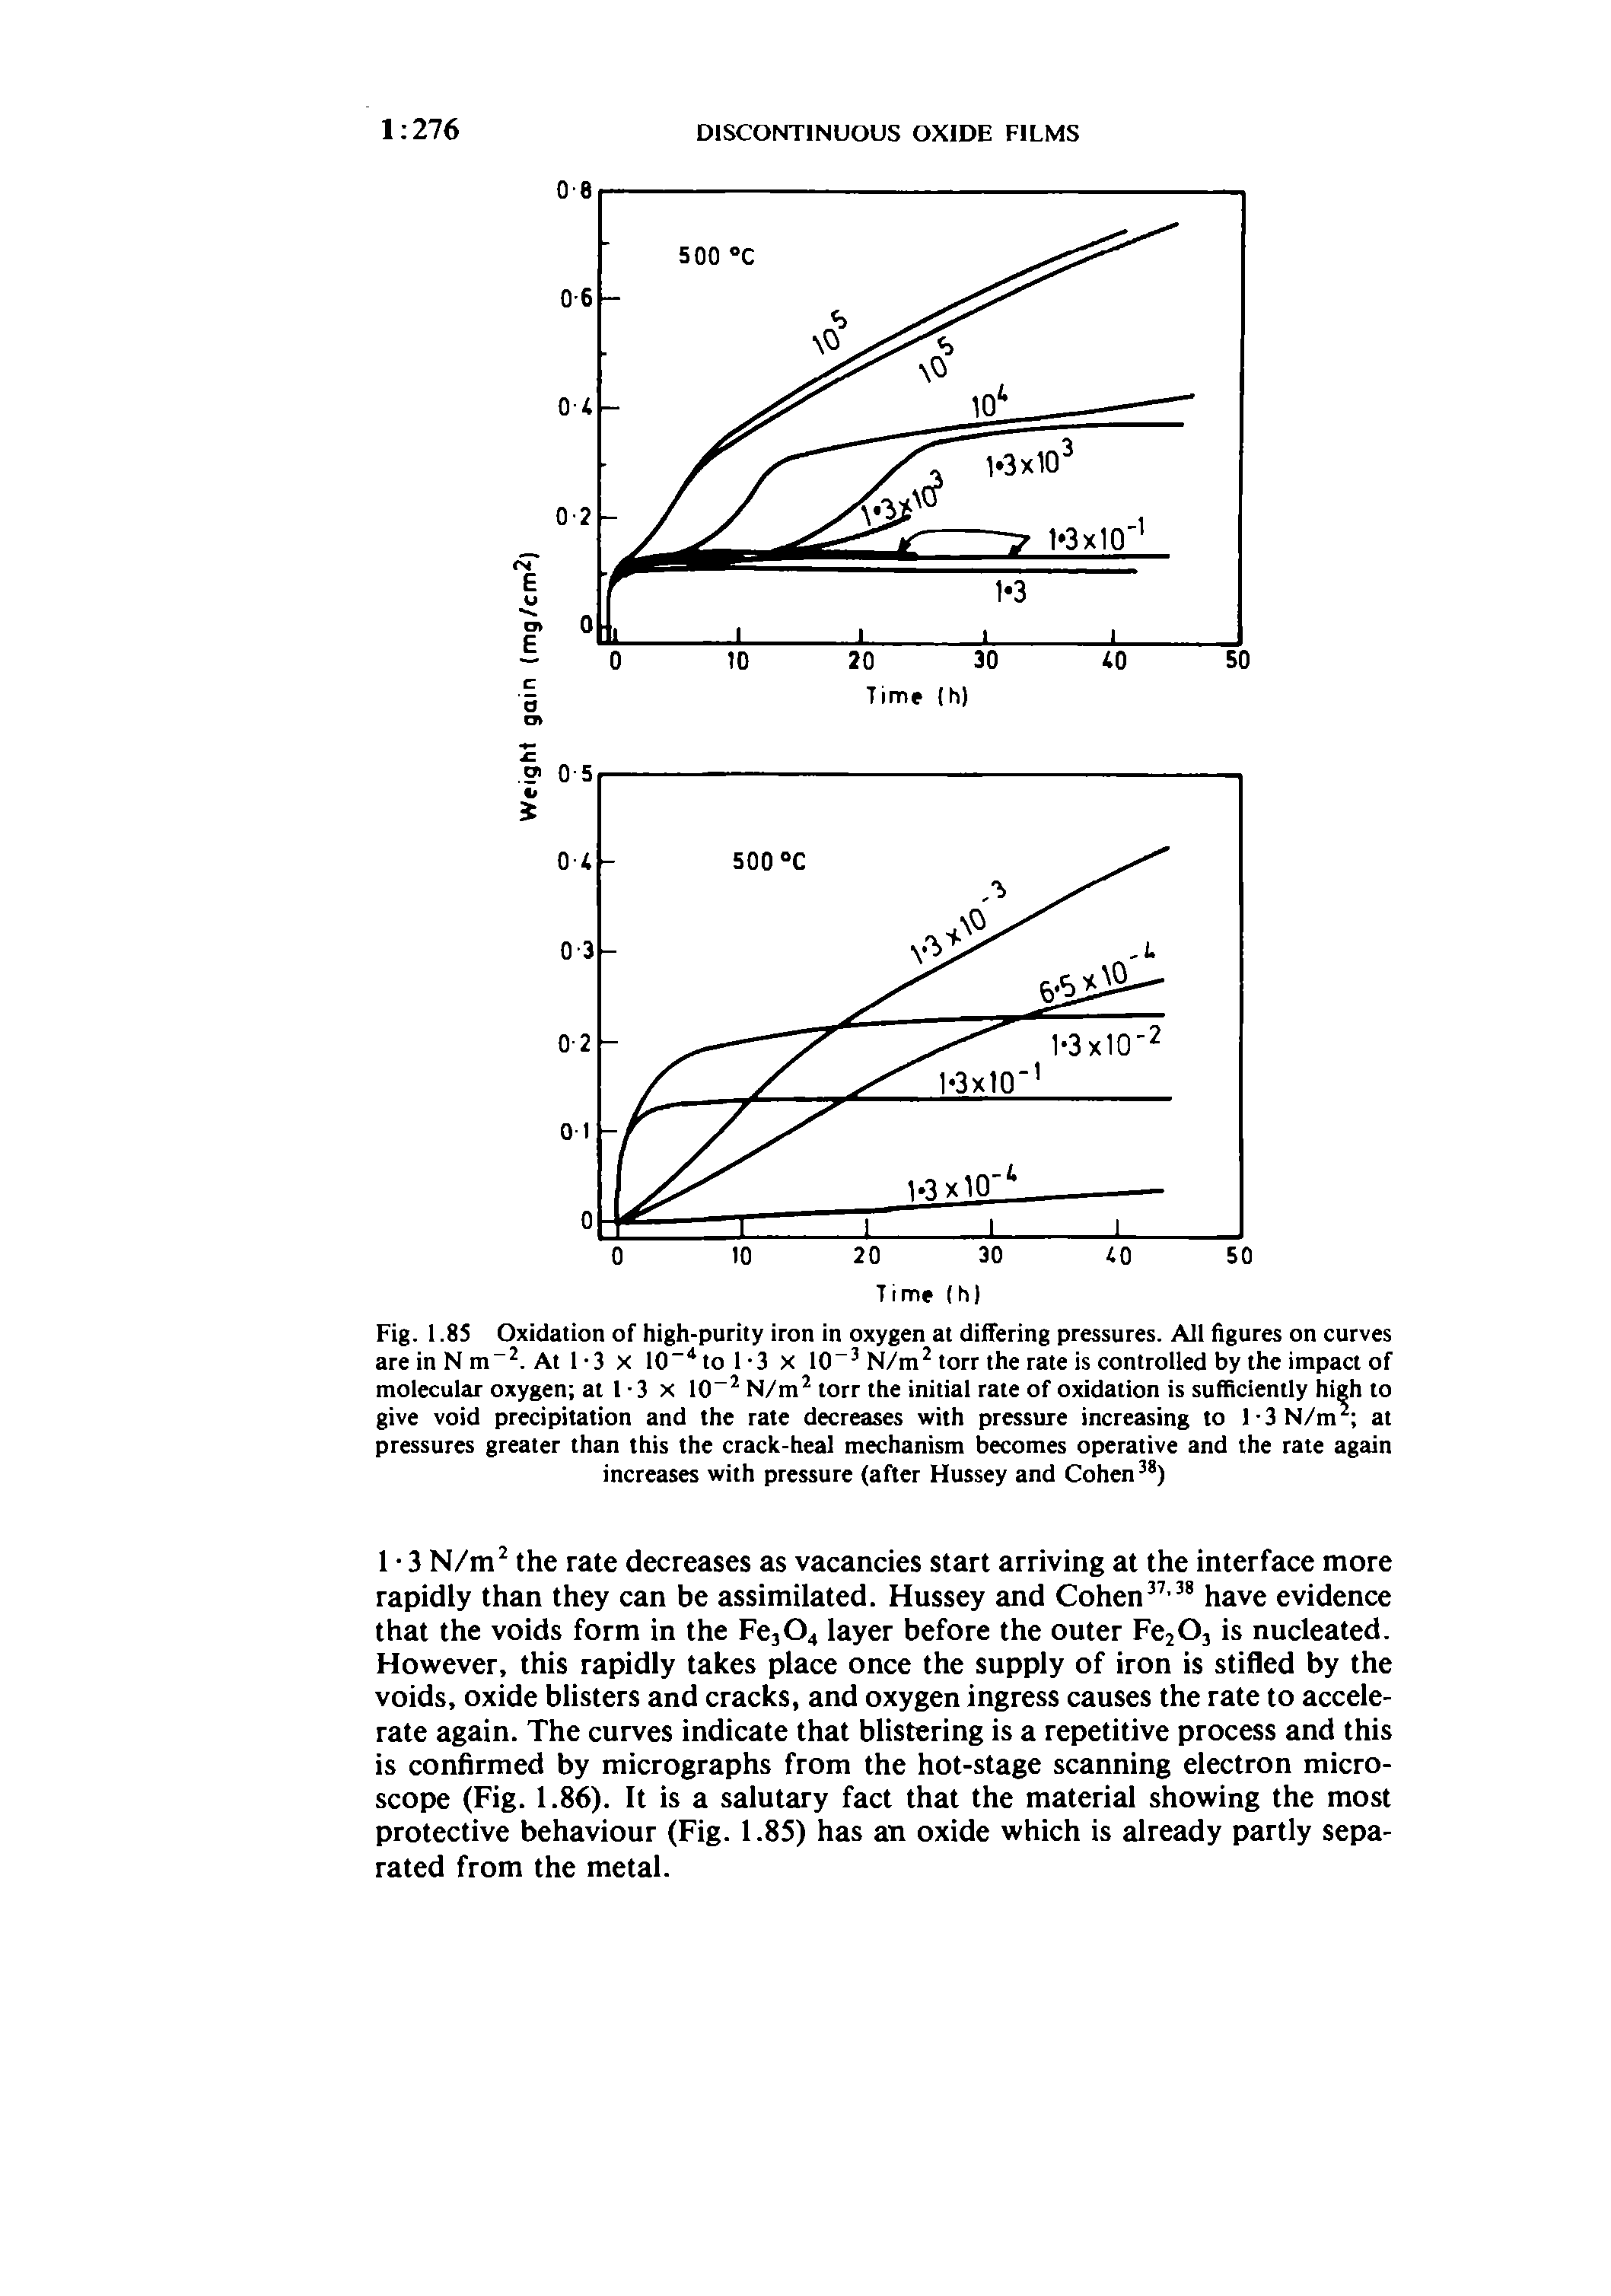 Fig. 1.85 Oxidation of high-purity iron in oxygen at differing pressures. All figures on curves are in N m . At 1-3 x 10 tol-3 x 10 N/m torr the rate is controlled by the impact of molecular oxygen at I - 3 x 10 N/m torr the initial rate of oxidation is sufficiently high to give void precipitation and the rate decreases with pressure increasing to l-3N/m at pressures greater than this the crack-heal mechanism becomes operative and the rate again increases with pressure (after Hussey and Cohen...